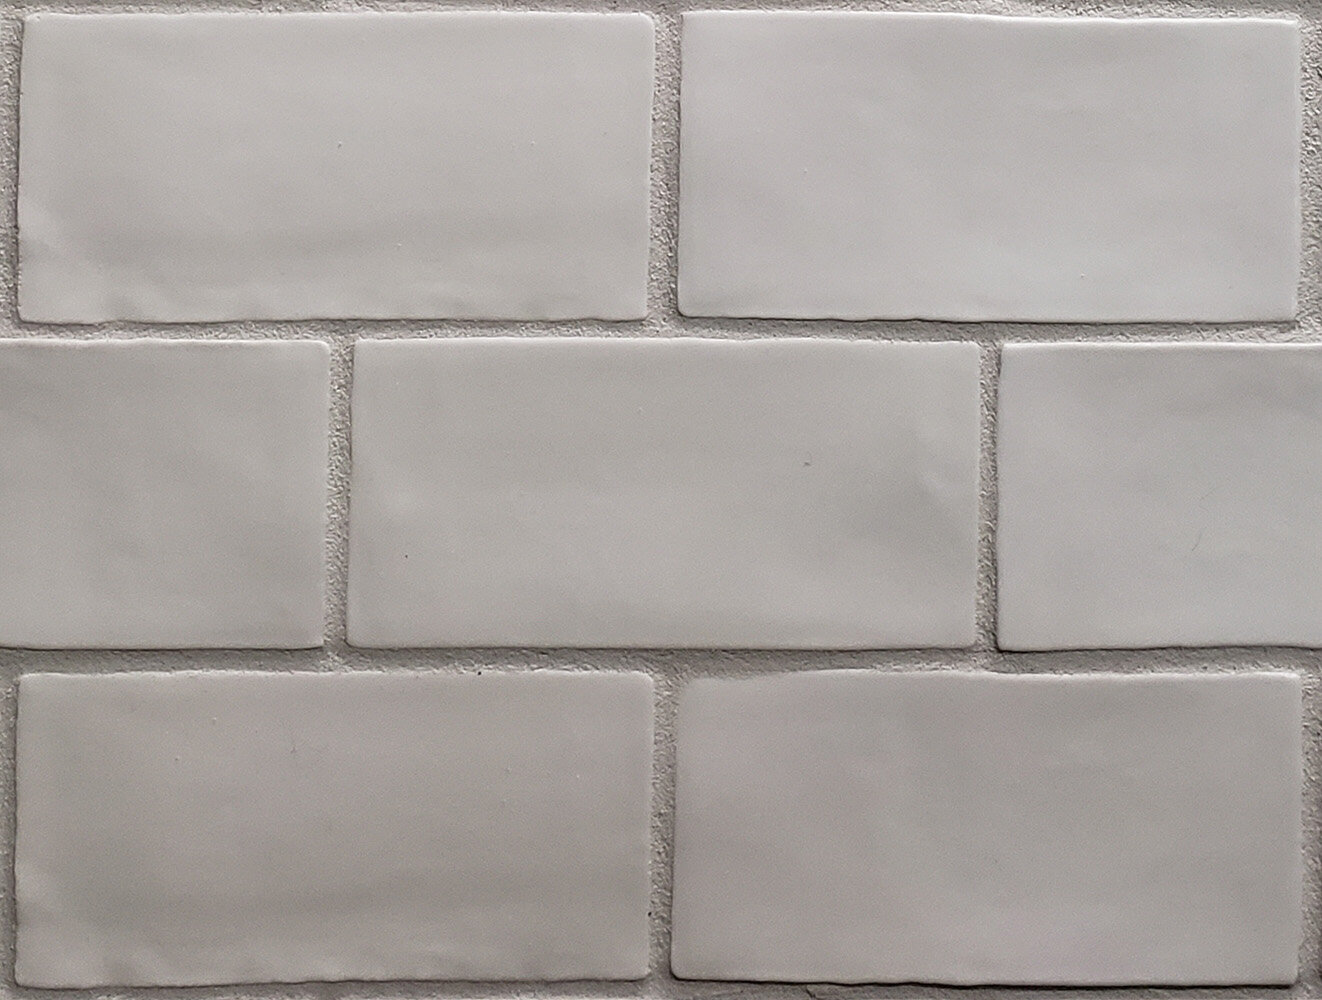 Grout Size For Your Tile, How Thick Is Standard Subway Tile Spacing